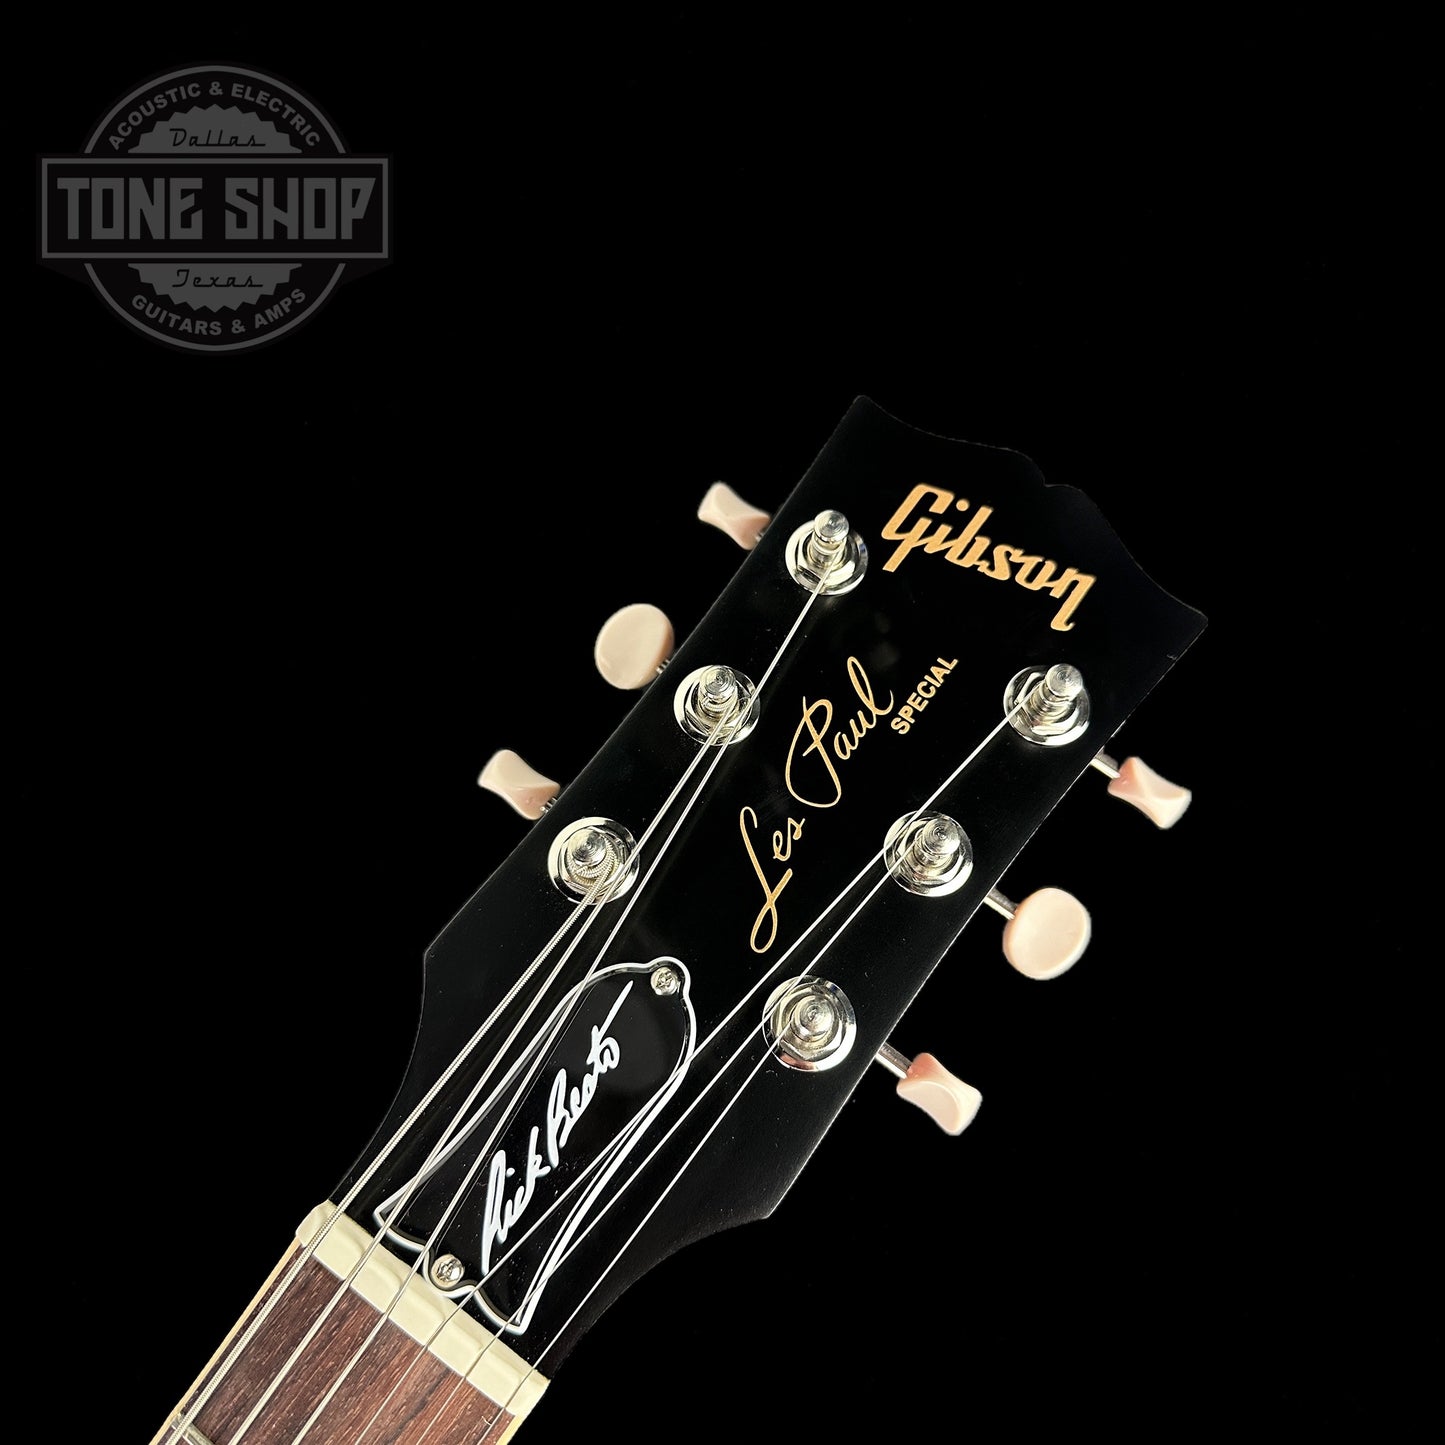 Front of headstock of Gibson Les Paul Special Double Cutaway Limited Edition Rick Beato Signature Sparkling Burgandy Satin.